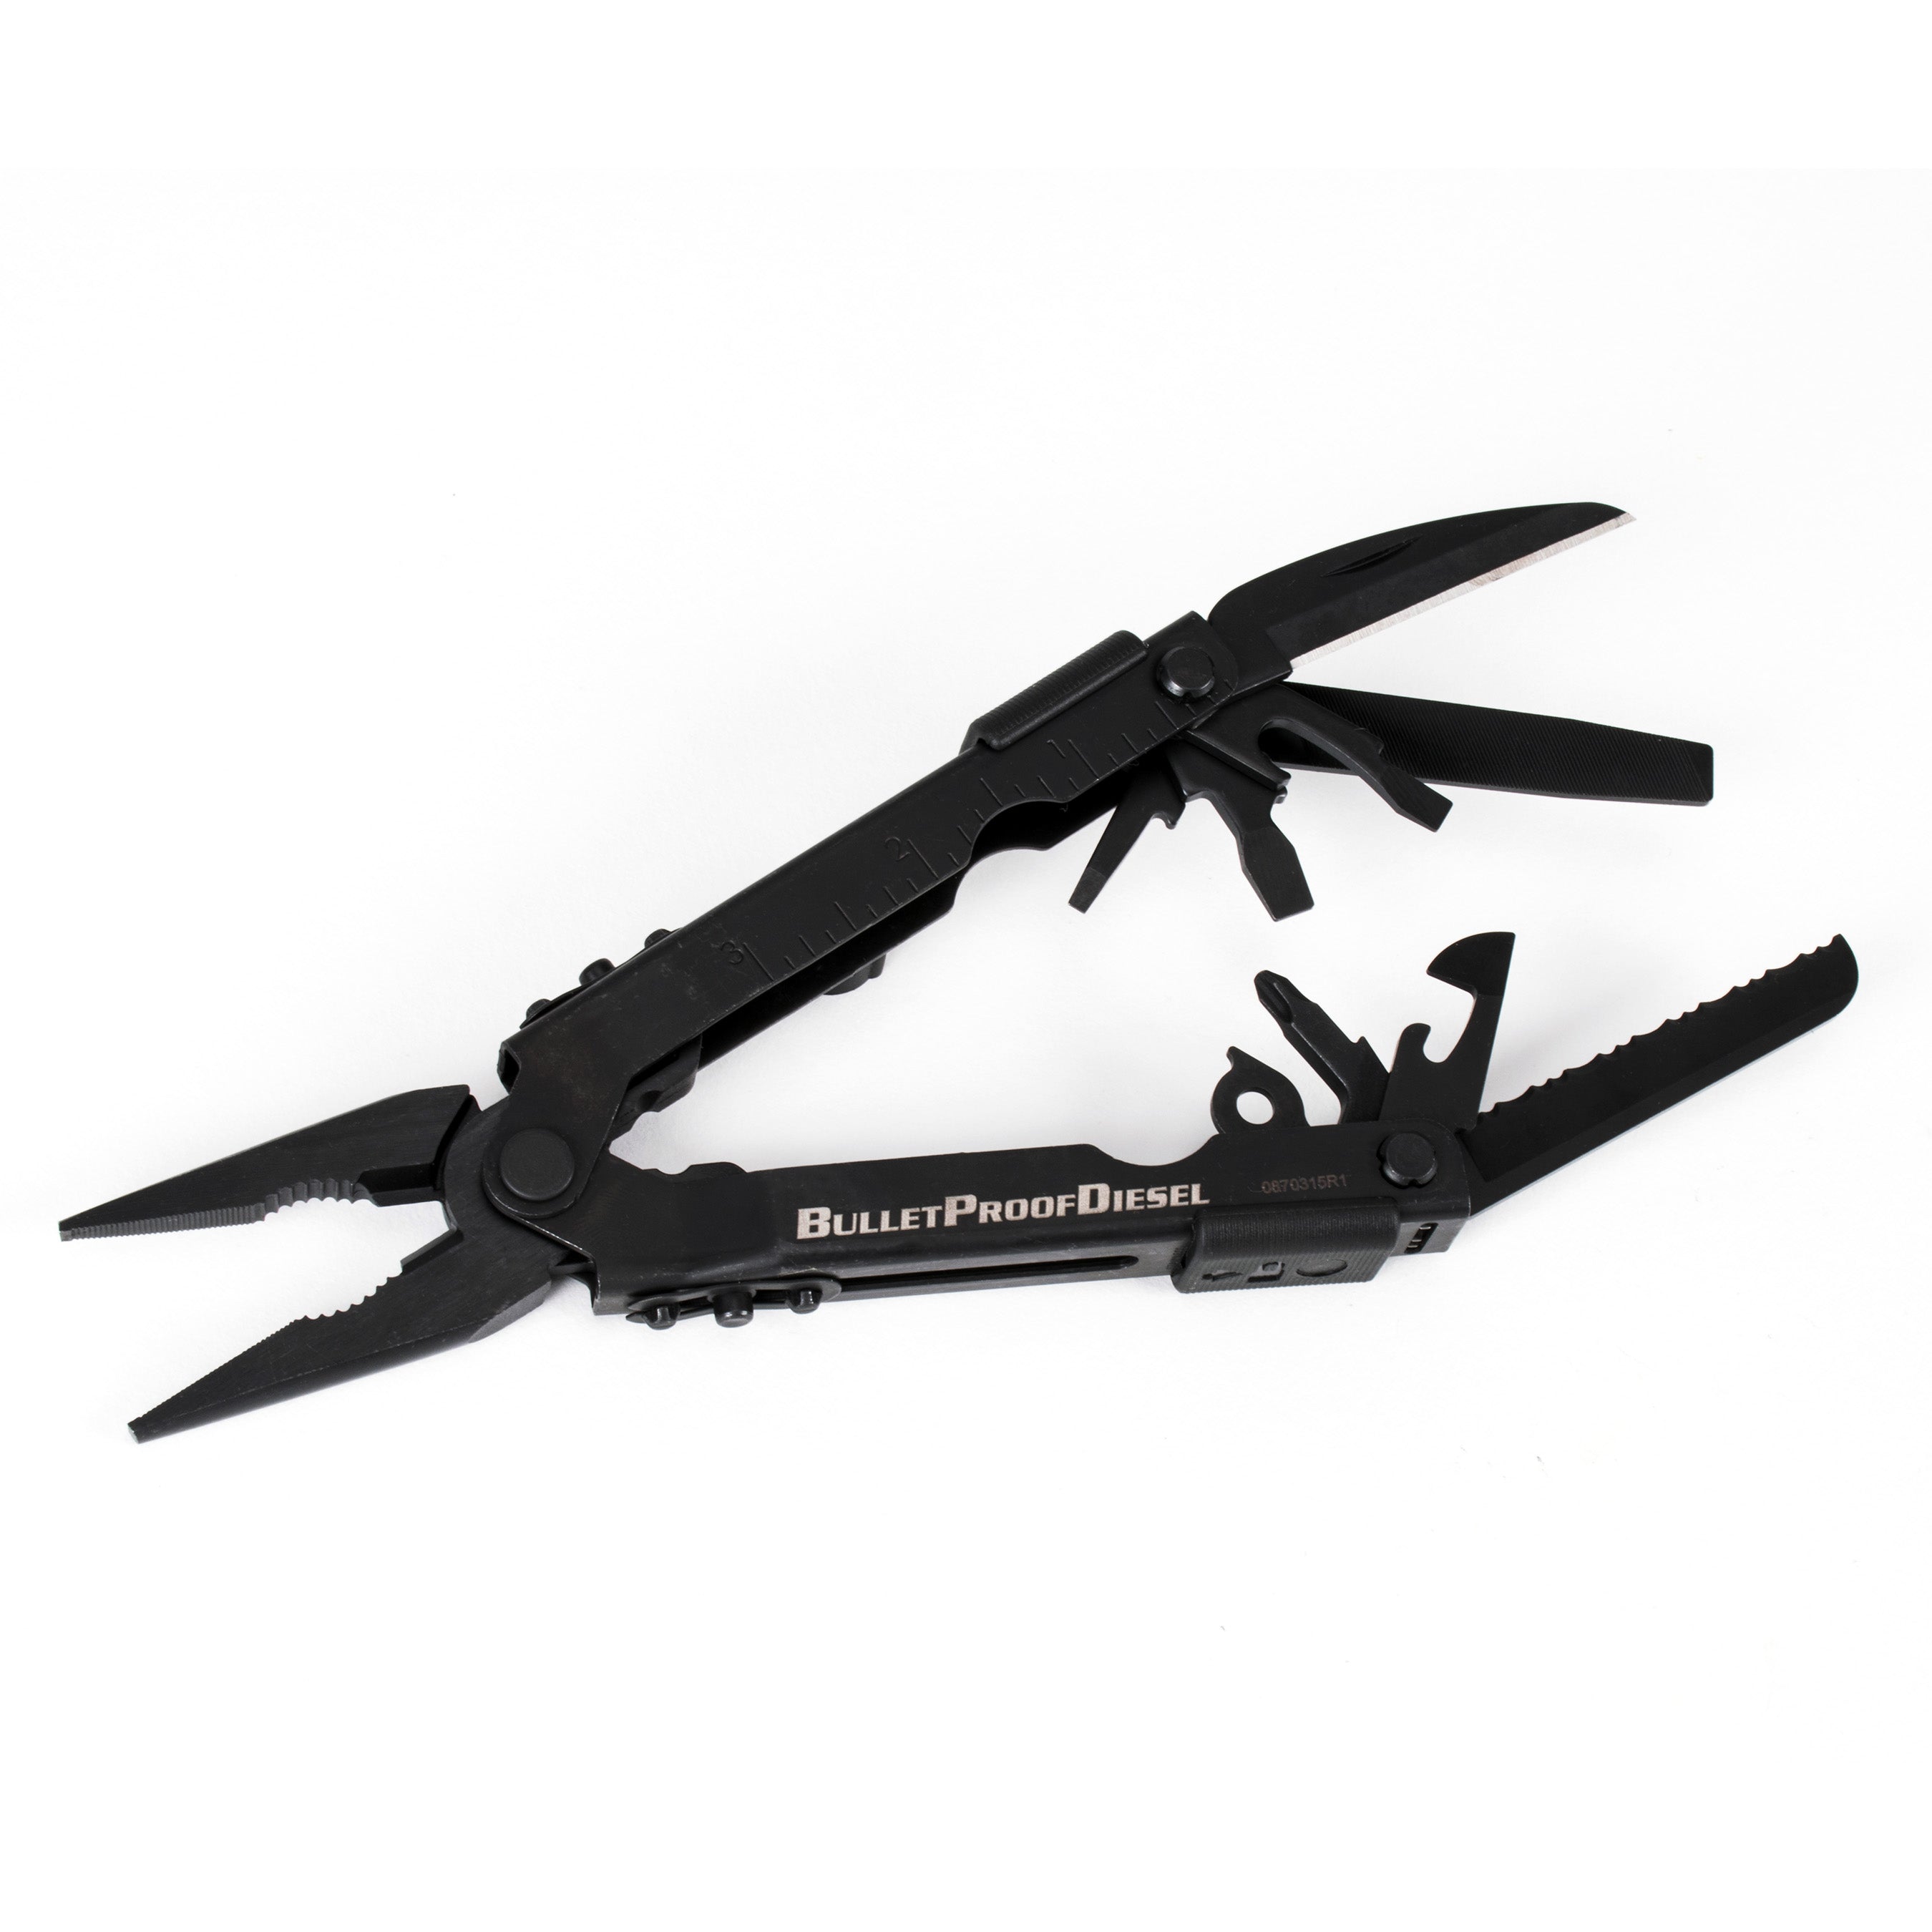 This gerber pocket plier multi tool also has a bottle opener, phillips and flathead screwdriver, saw, file and knife.